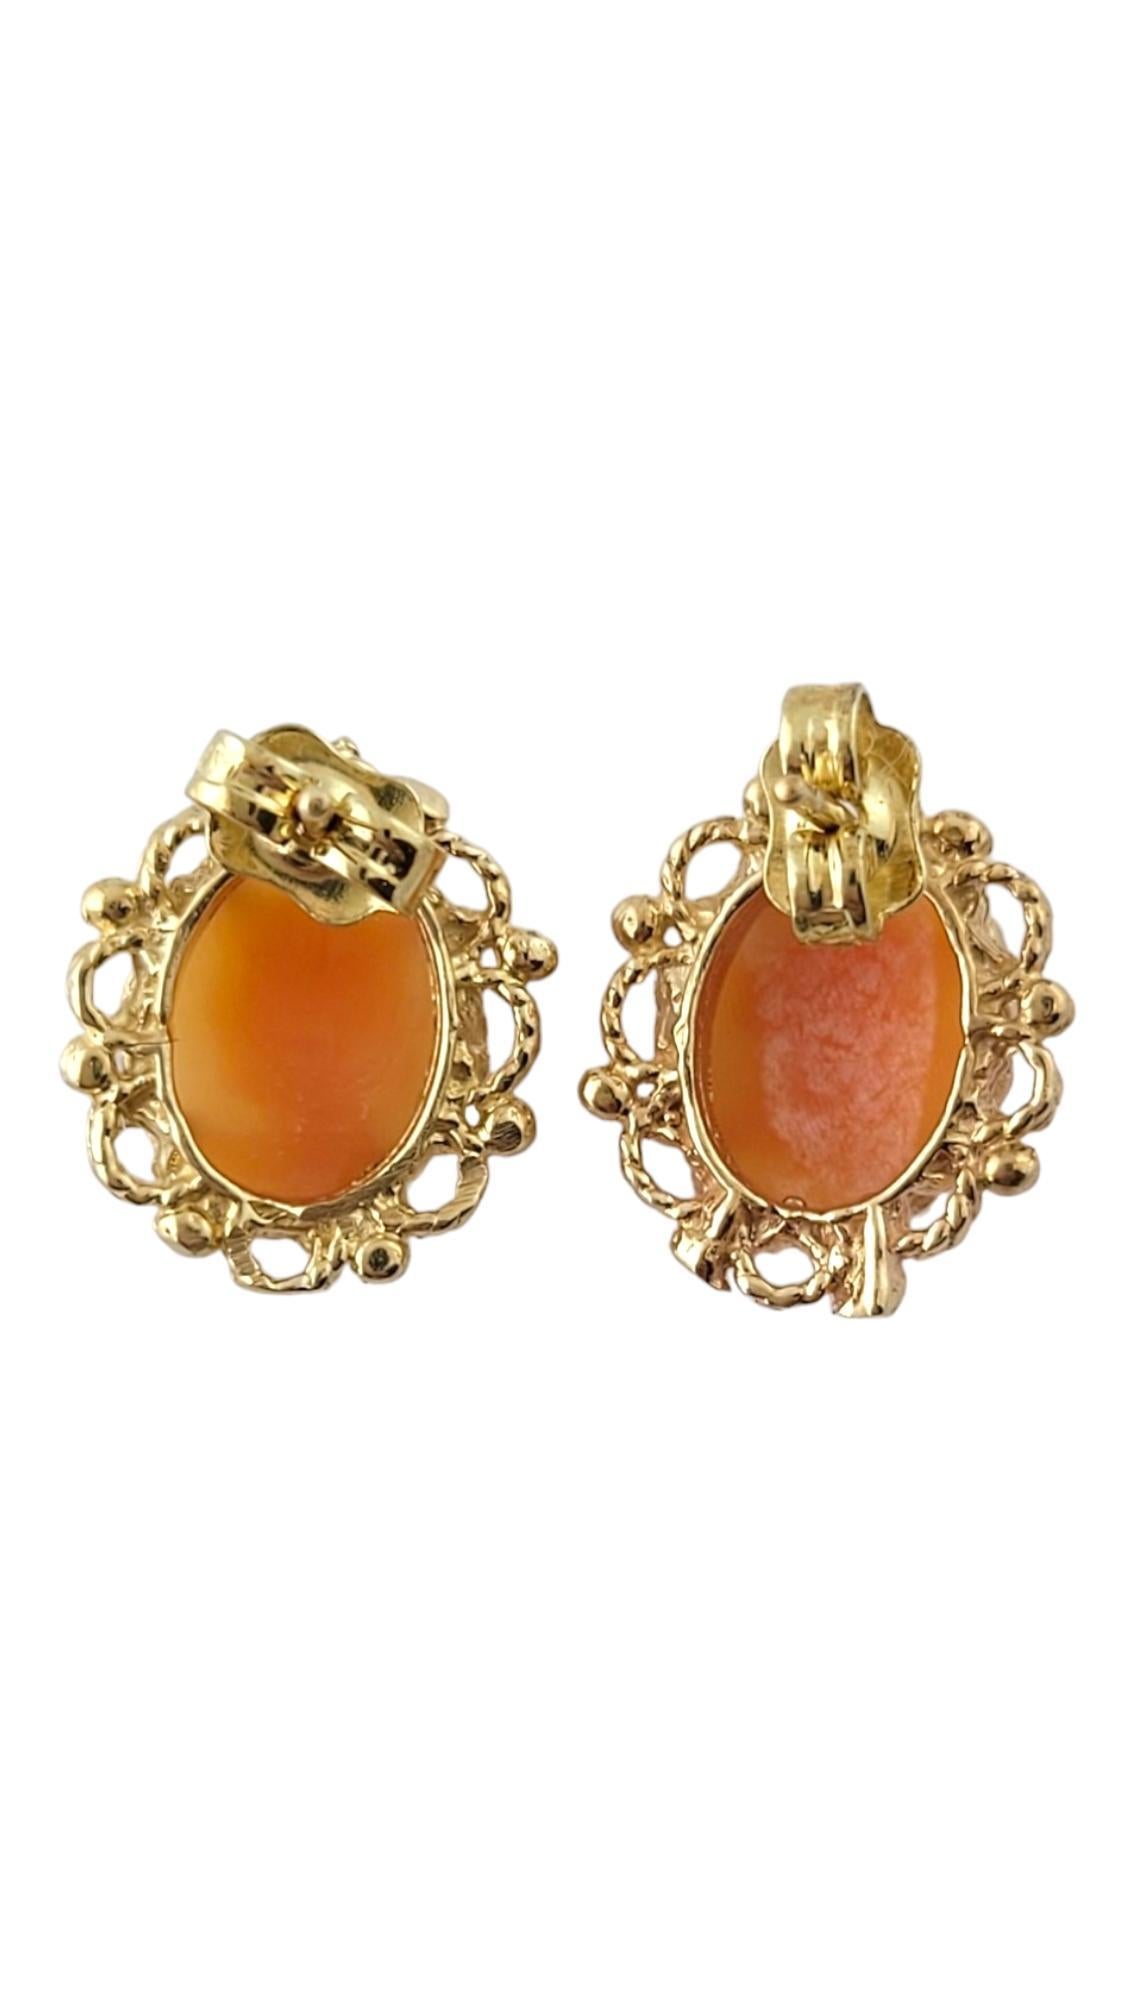 Women's Vintage 10K Yellow Gold Cameo Earrings #16915 For Sale